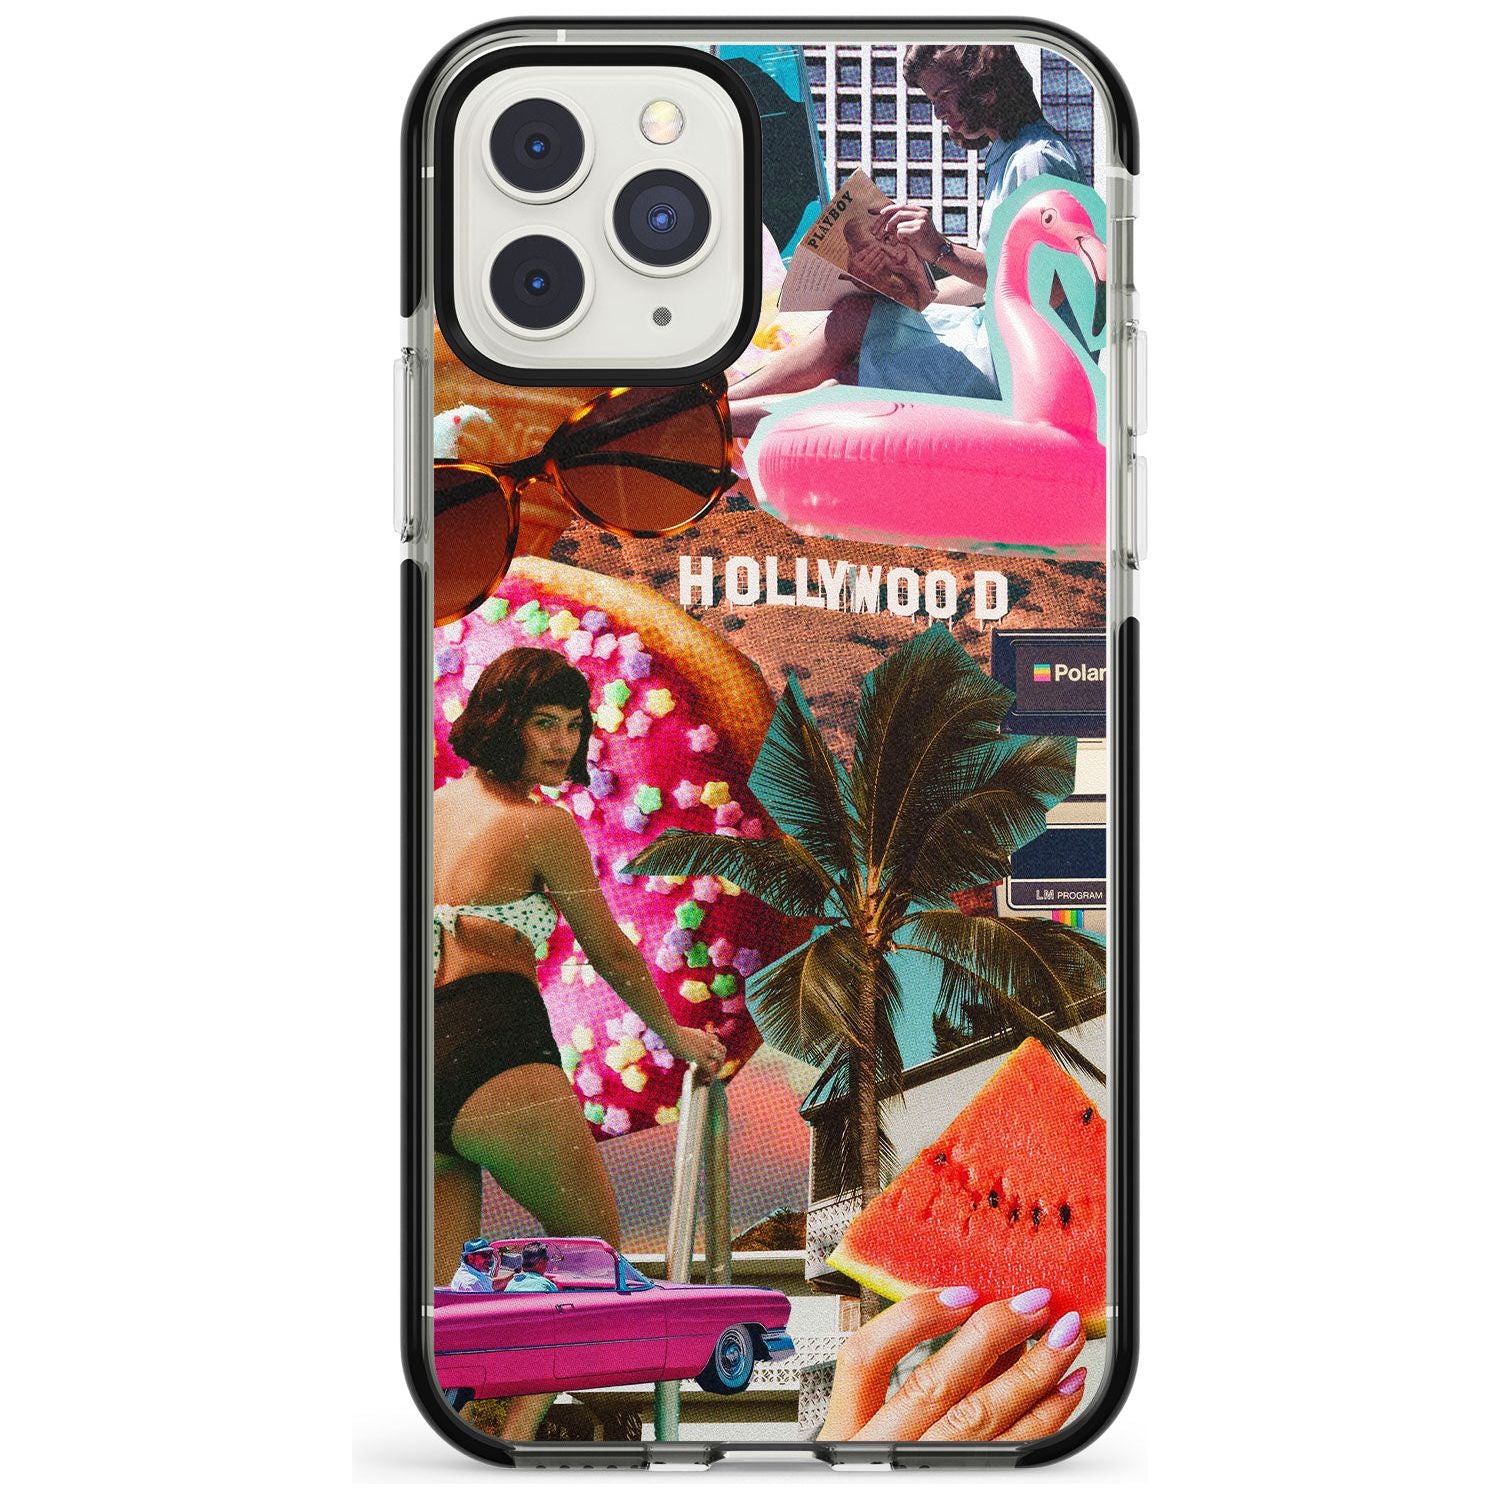 Vintage Collage: Hollywood Mix Black Impact Phone Case for iPhone 11 Pro Max